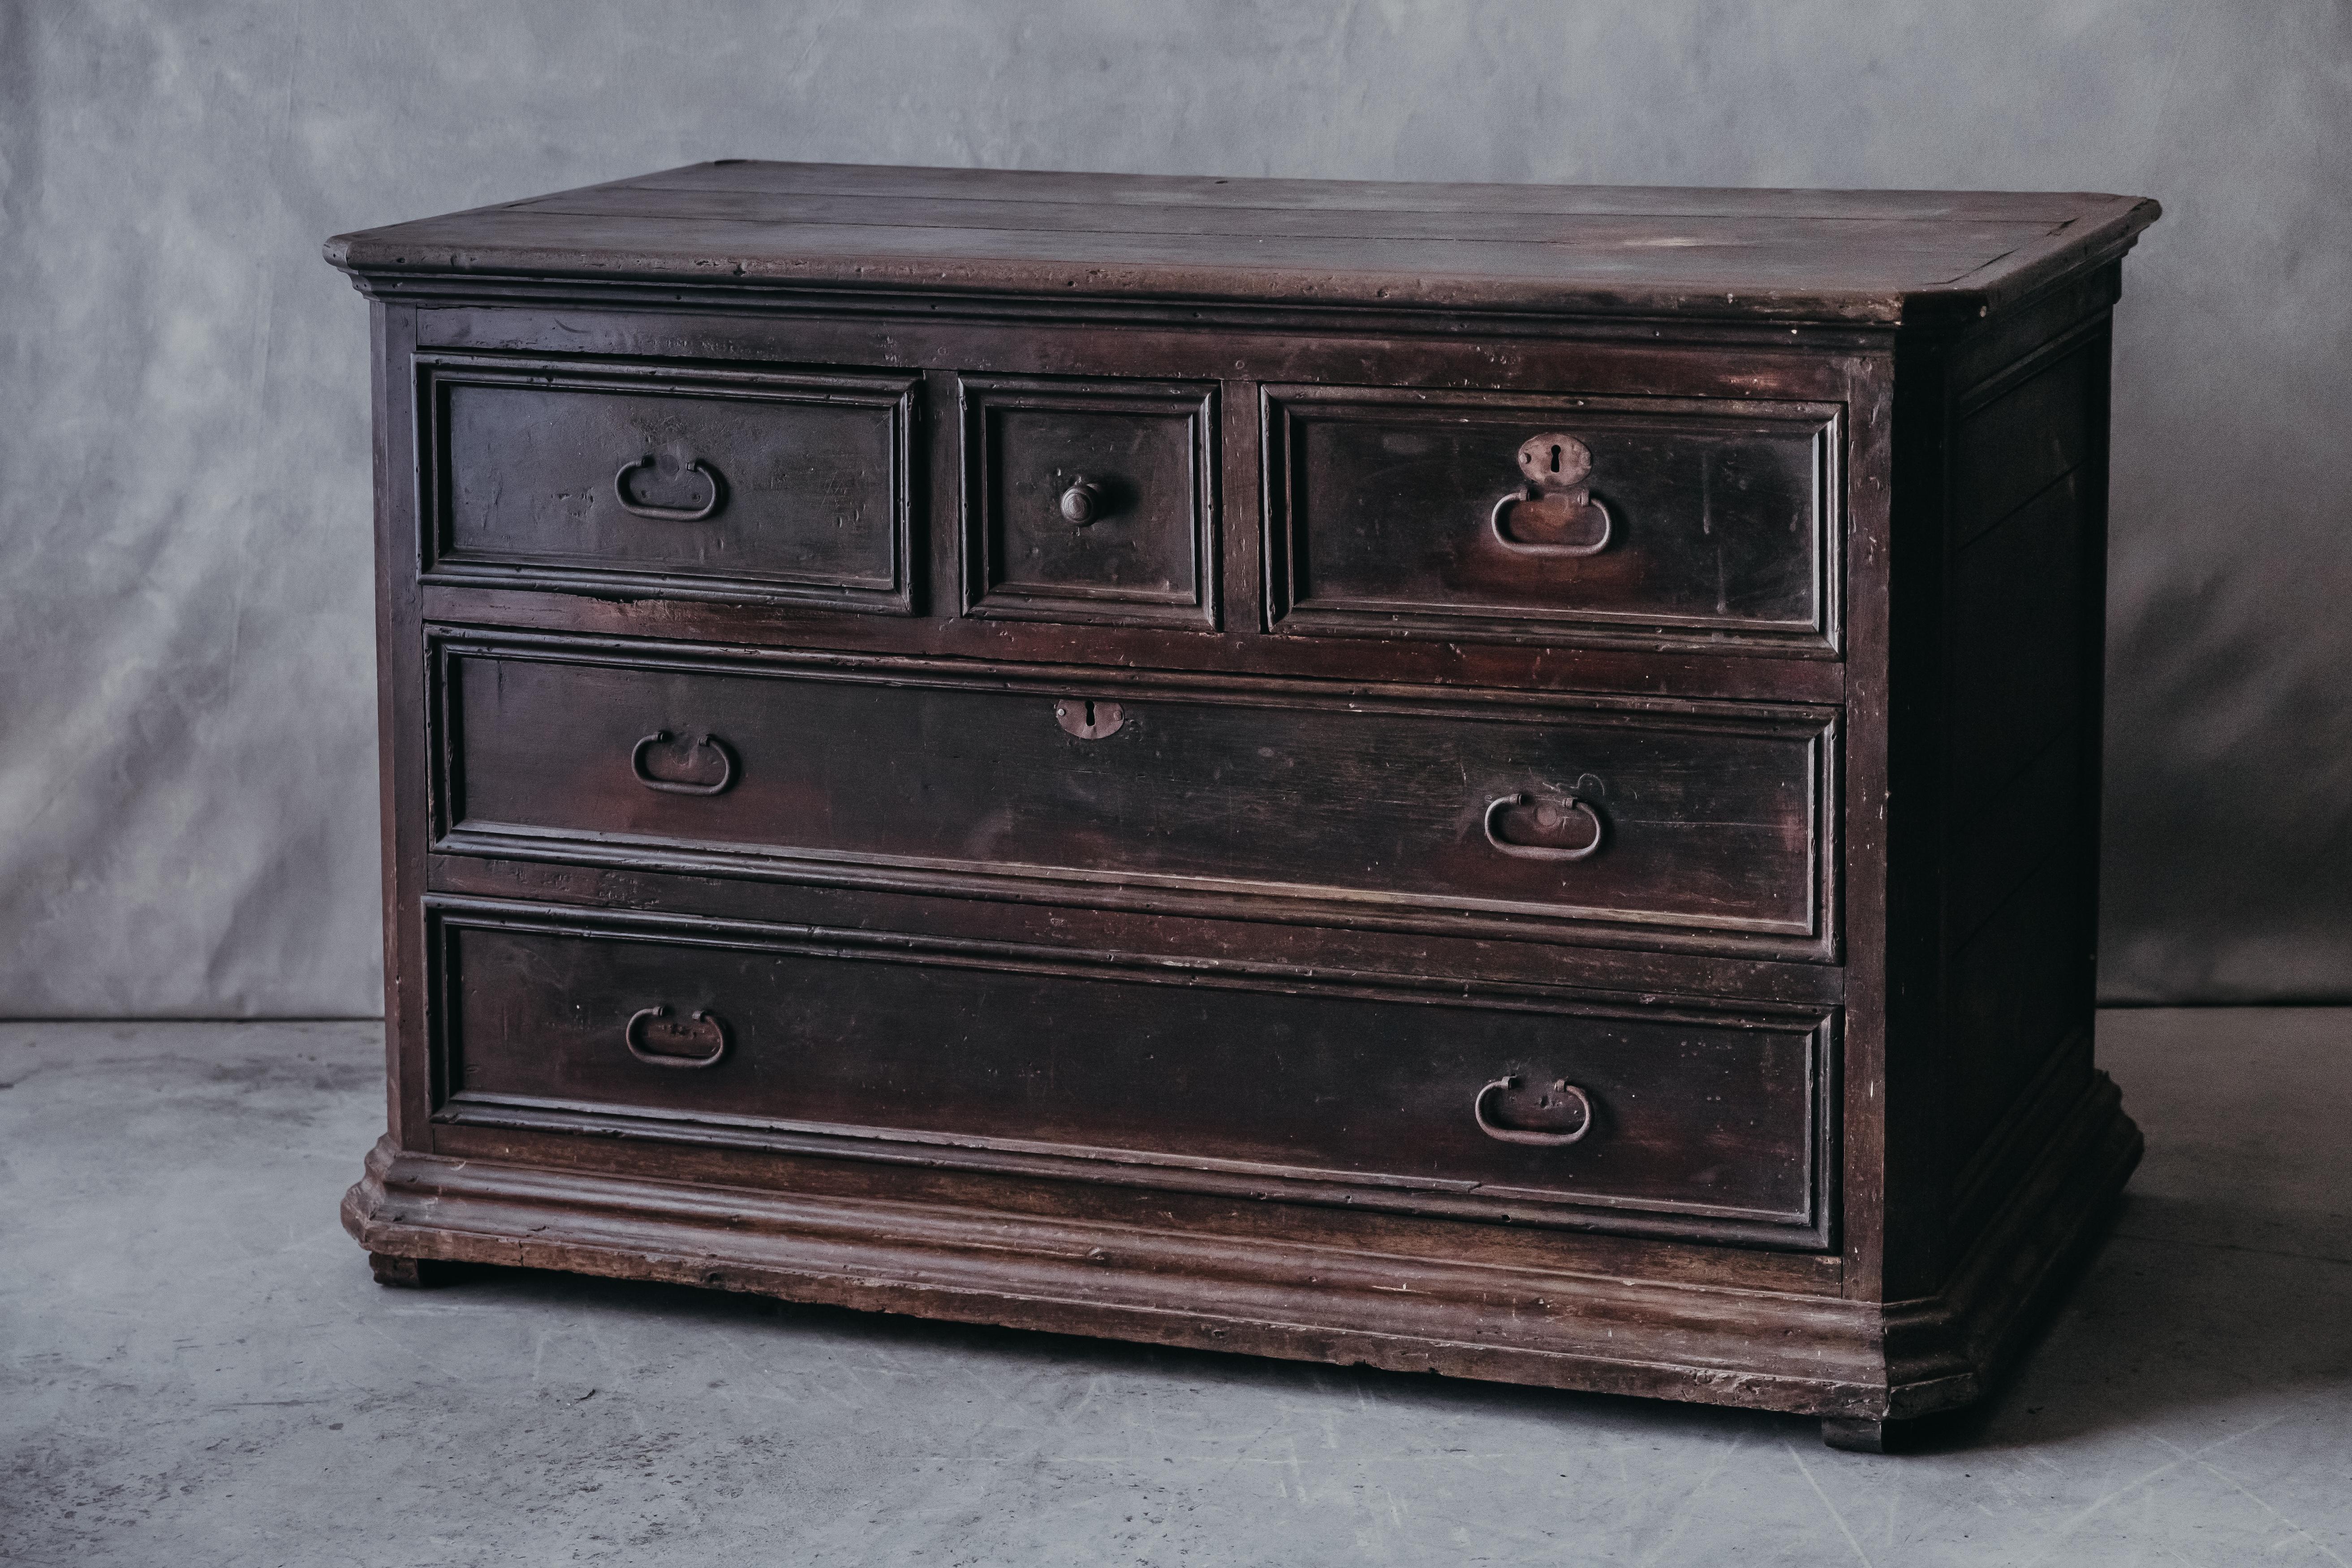 European 18th Century Chest of Drawers from Italy, circa 1750